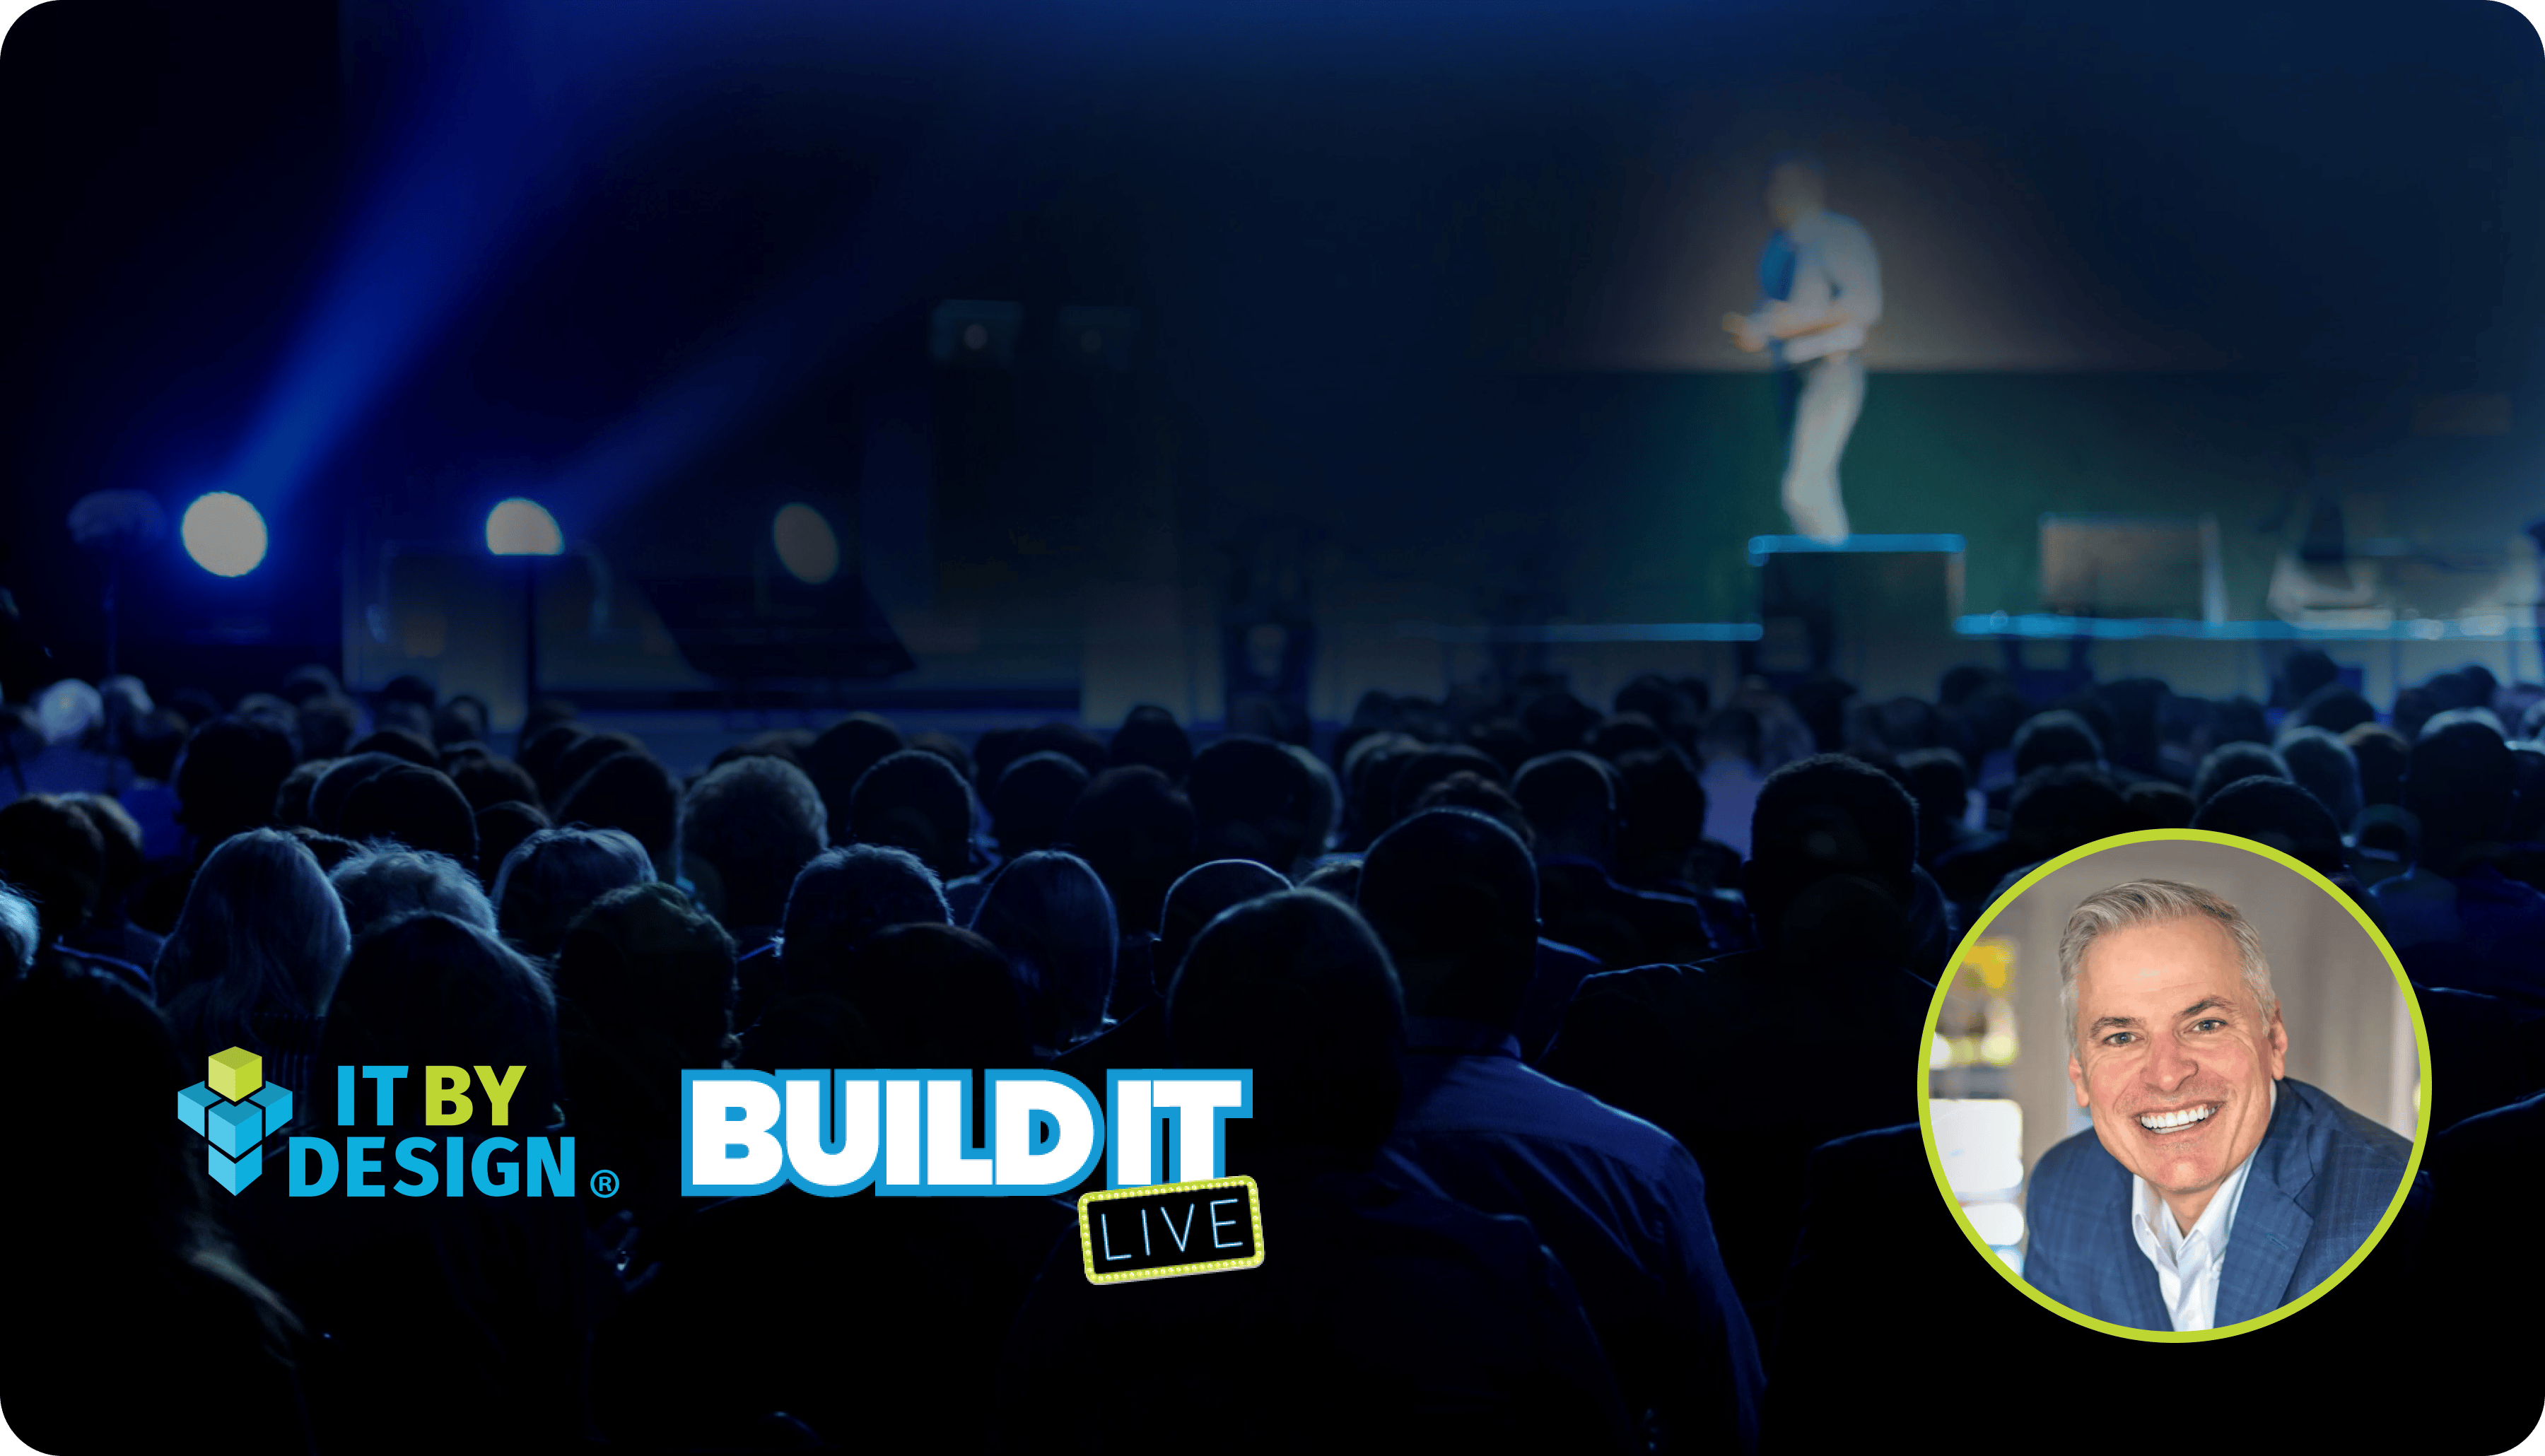 BuildIT Live 2024 conference poster. Shows an image of a speaker with a spotlight shining on them as they speak to a crowd in a dark auditorium. On the image is the event logo for BuildIT Live in the center bottom and in the bottom left is the logo for the company hosting the conference, ITByDesign. In the bottom right is a circular portrait image of a middle-aged man in a blazer and button down shirt representing the likely keynote speaker oft the event.